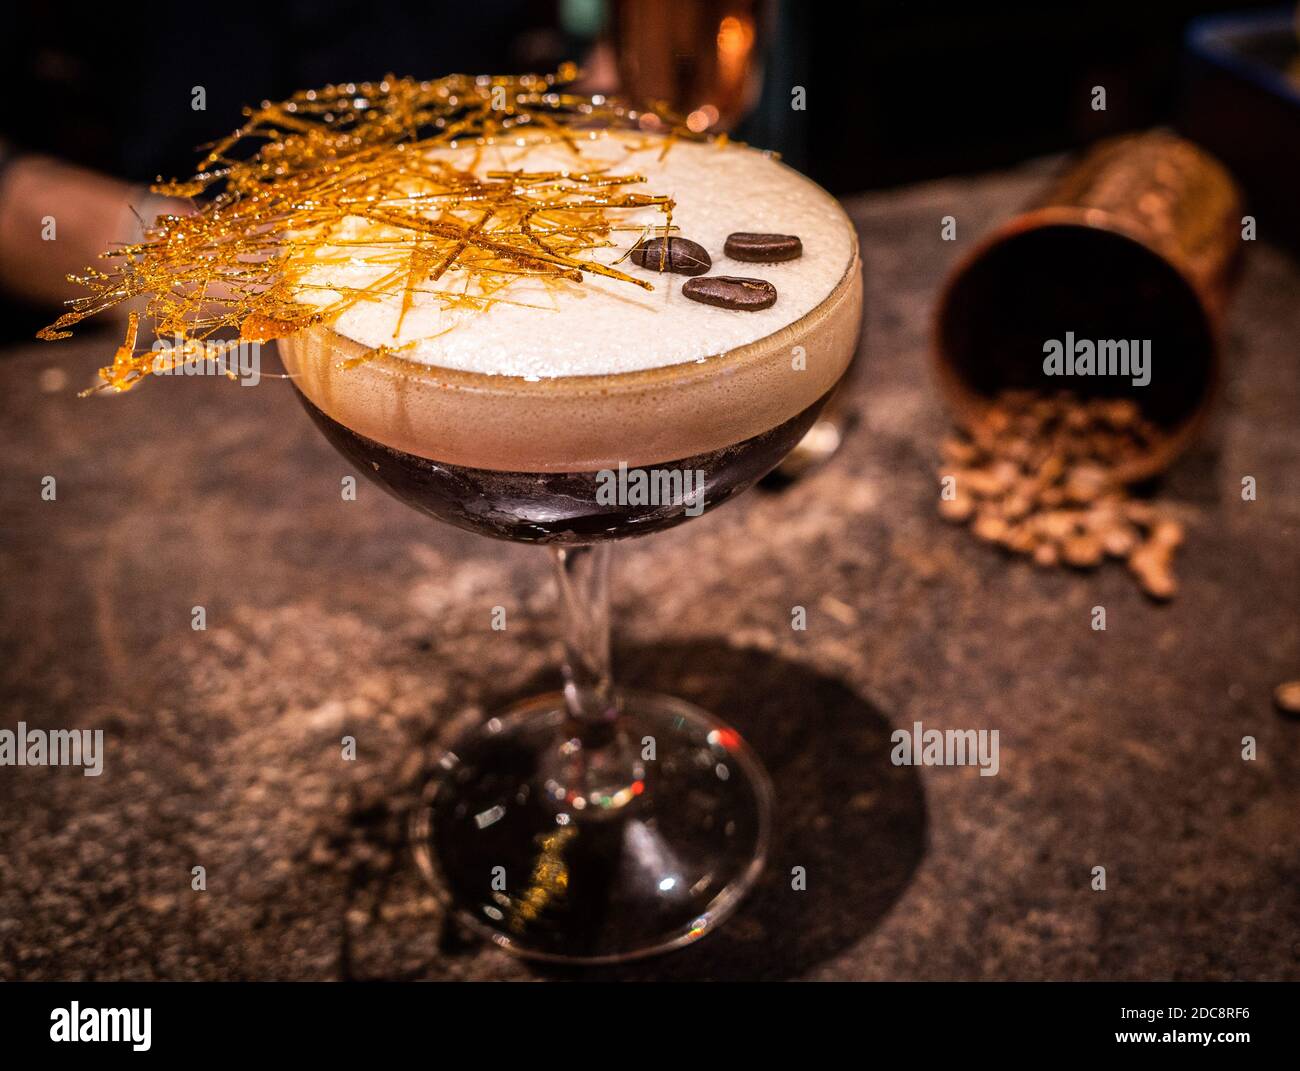 Espresso martini, with coffee beans on the background Stock Photo